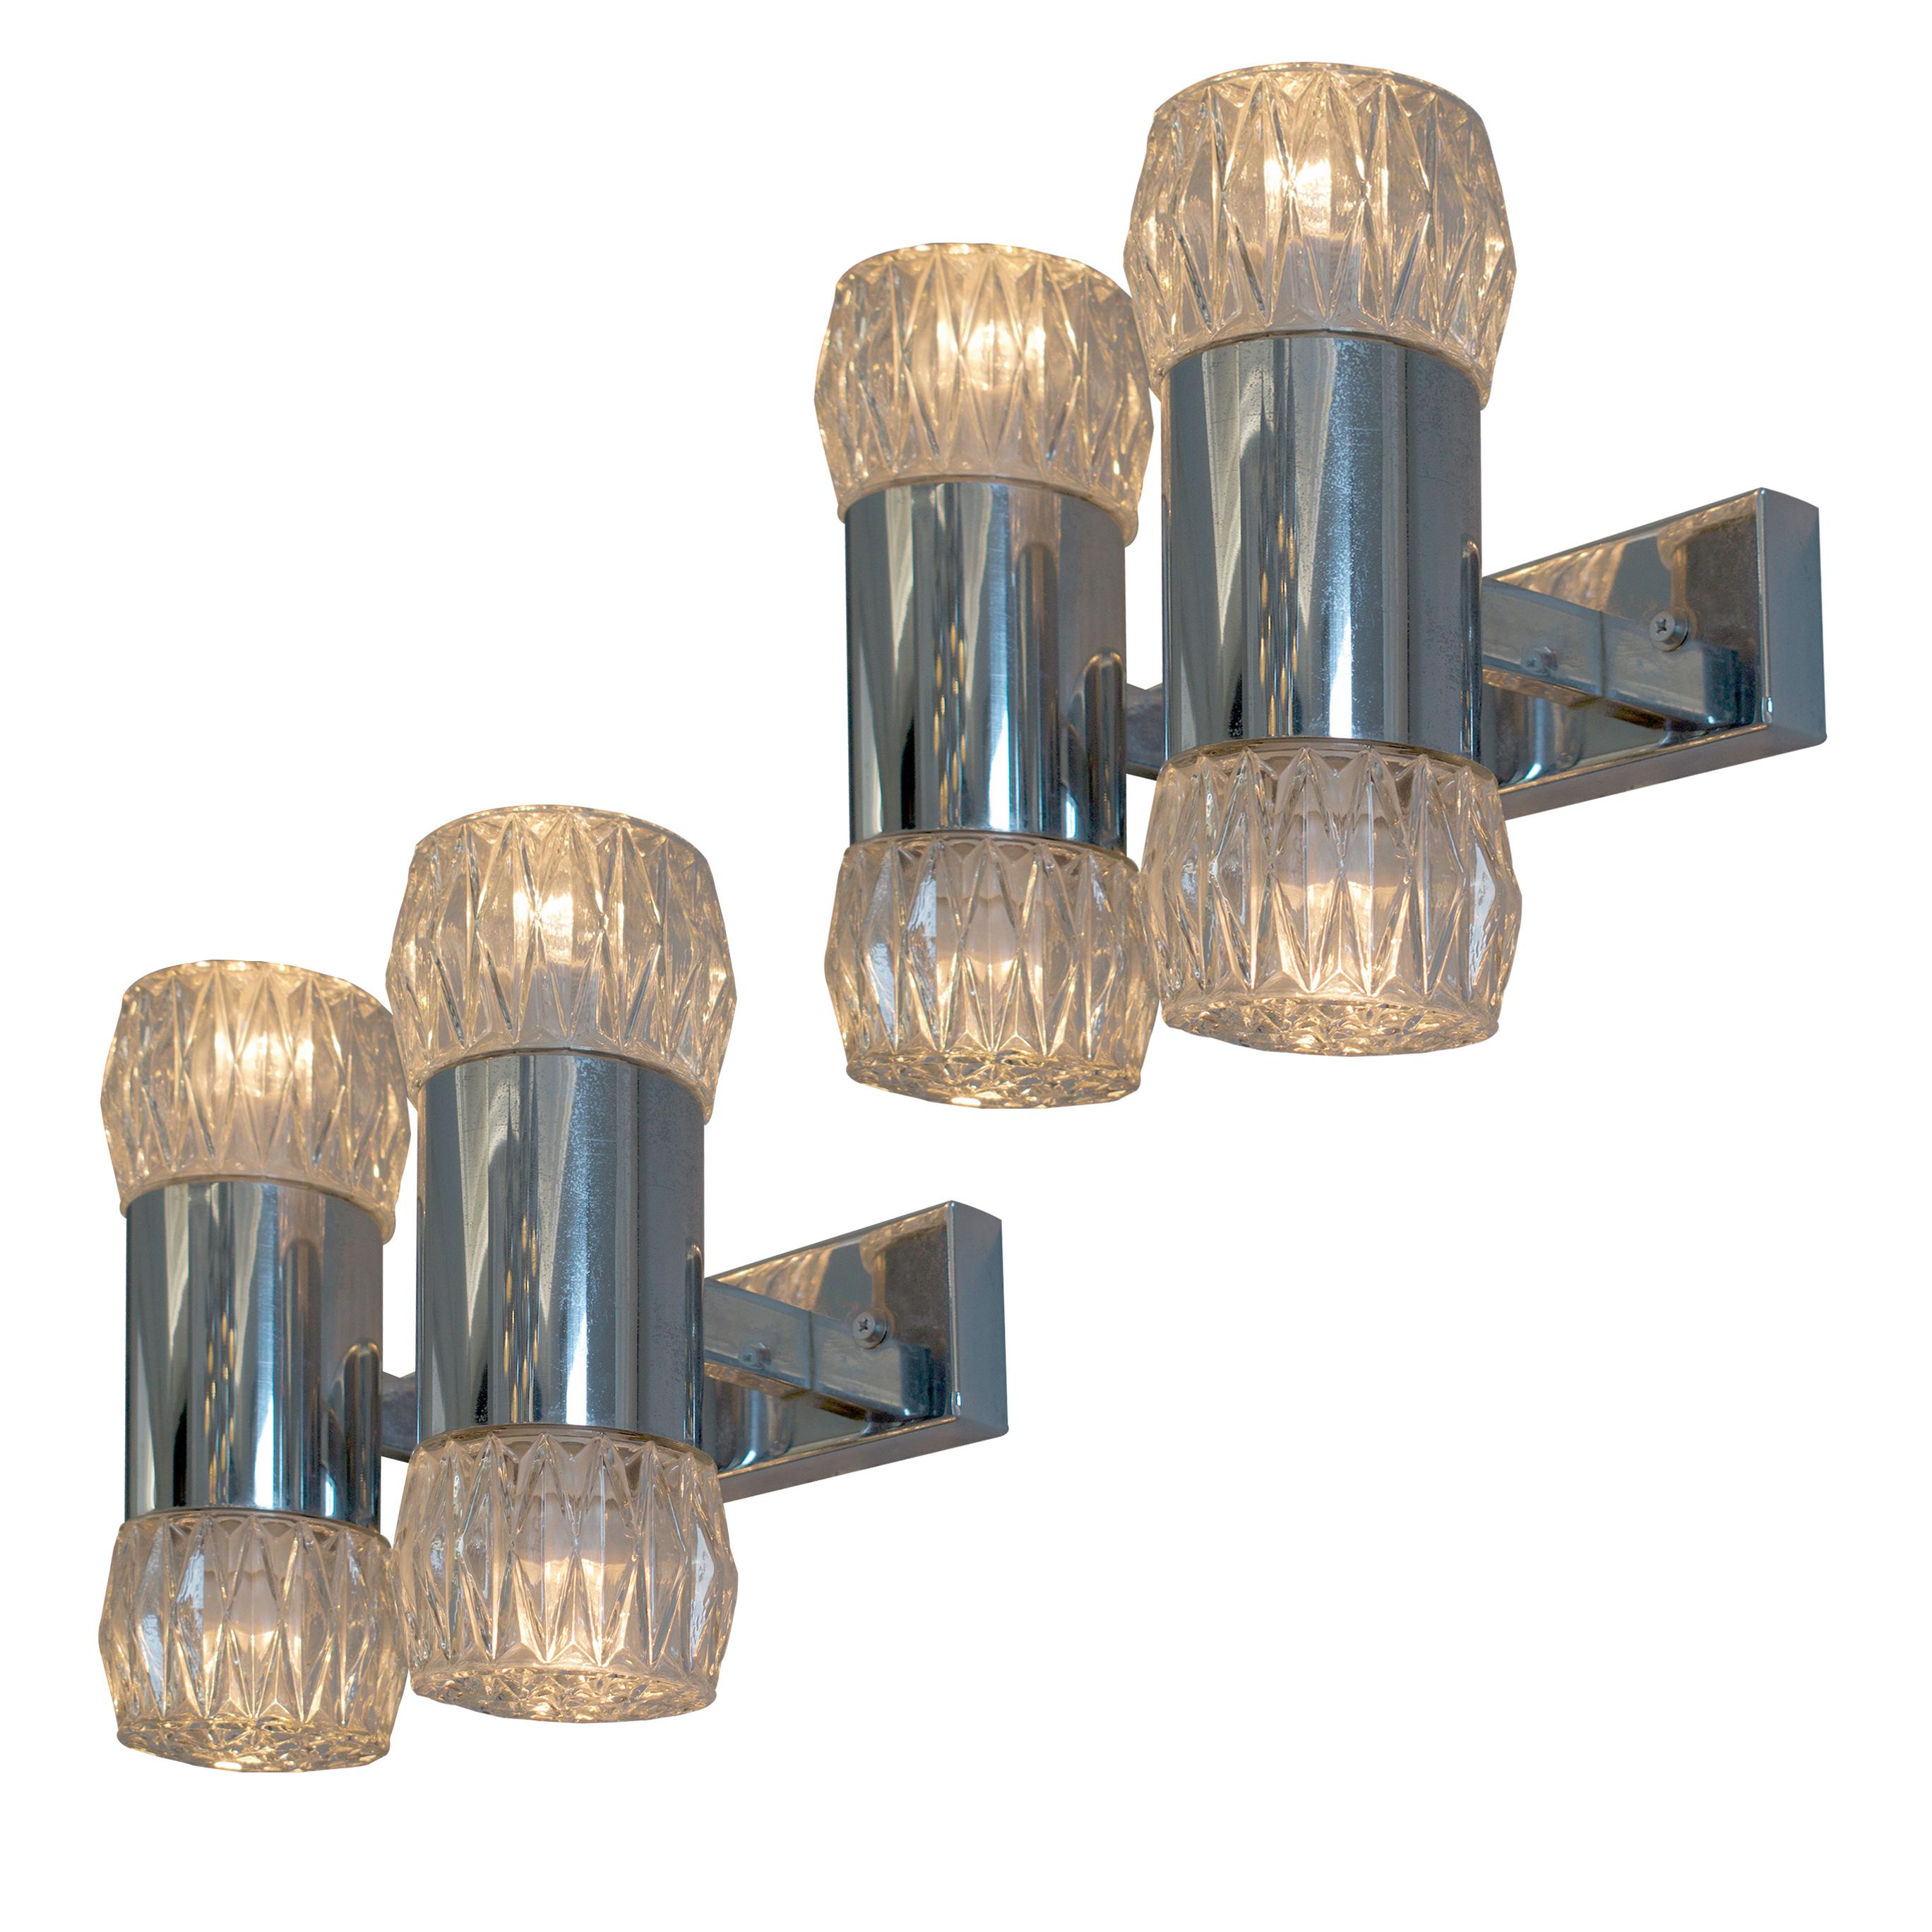 The Pair of Chrome and Glass Wall Lights designed by Gaetano Sciolari, crafted in Italy during the 1970s, is a testament to the enduring charm of Italian design. With their sleek chrome frames and screw-on glass shades, these fixtures offer a blend